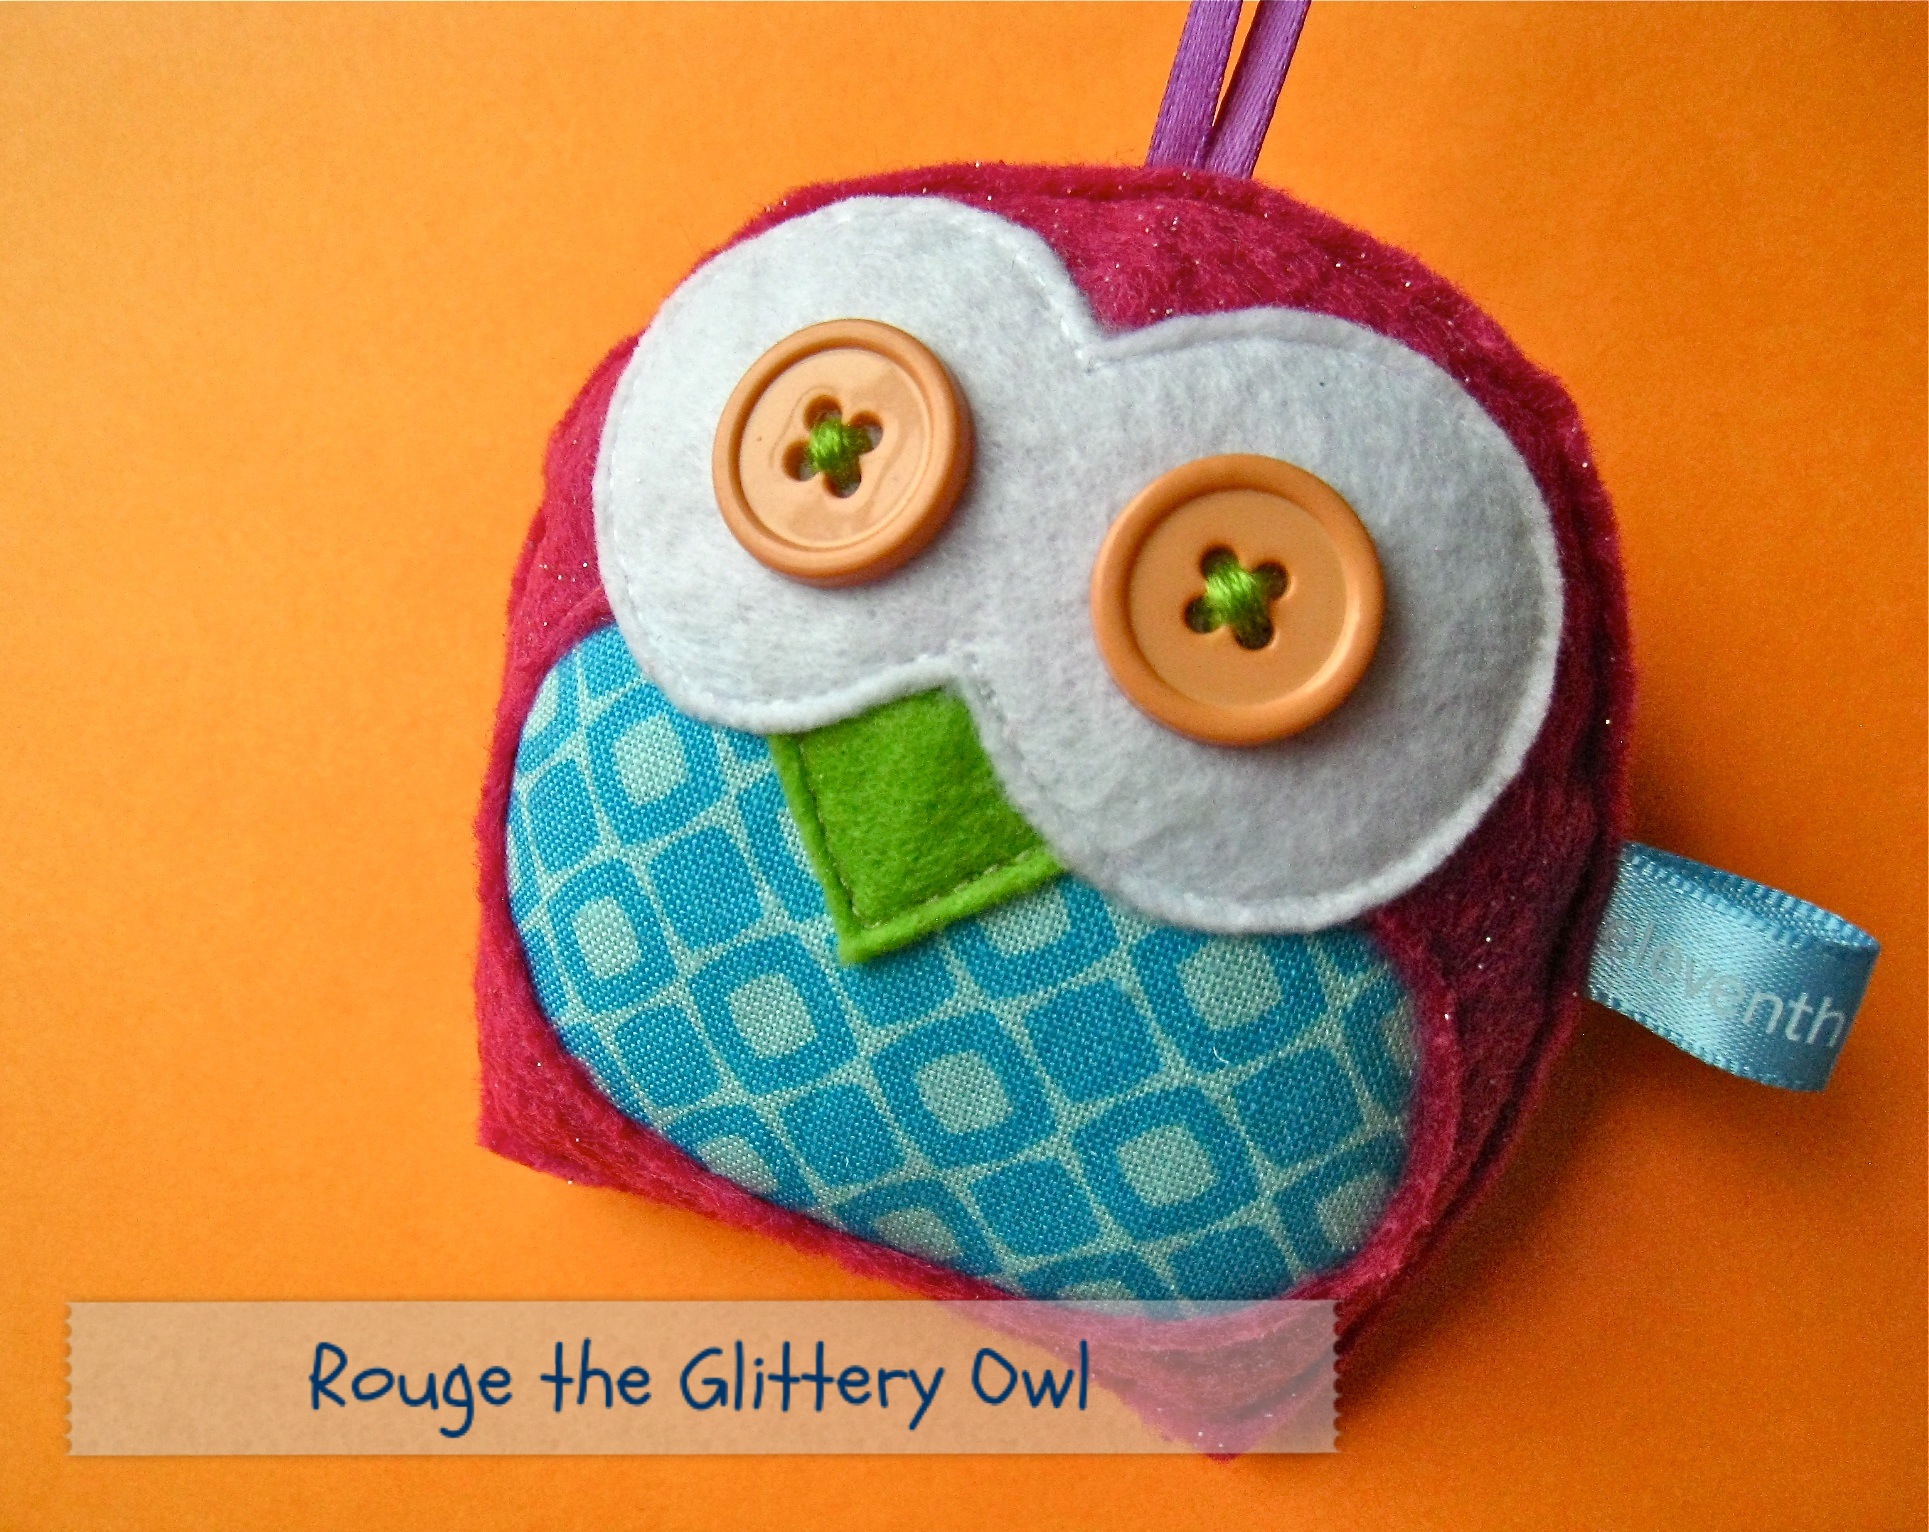 Rouge the Glittery Owl